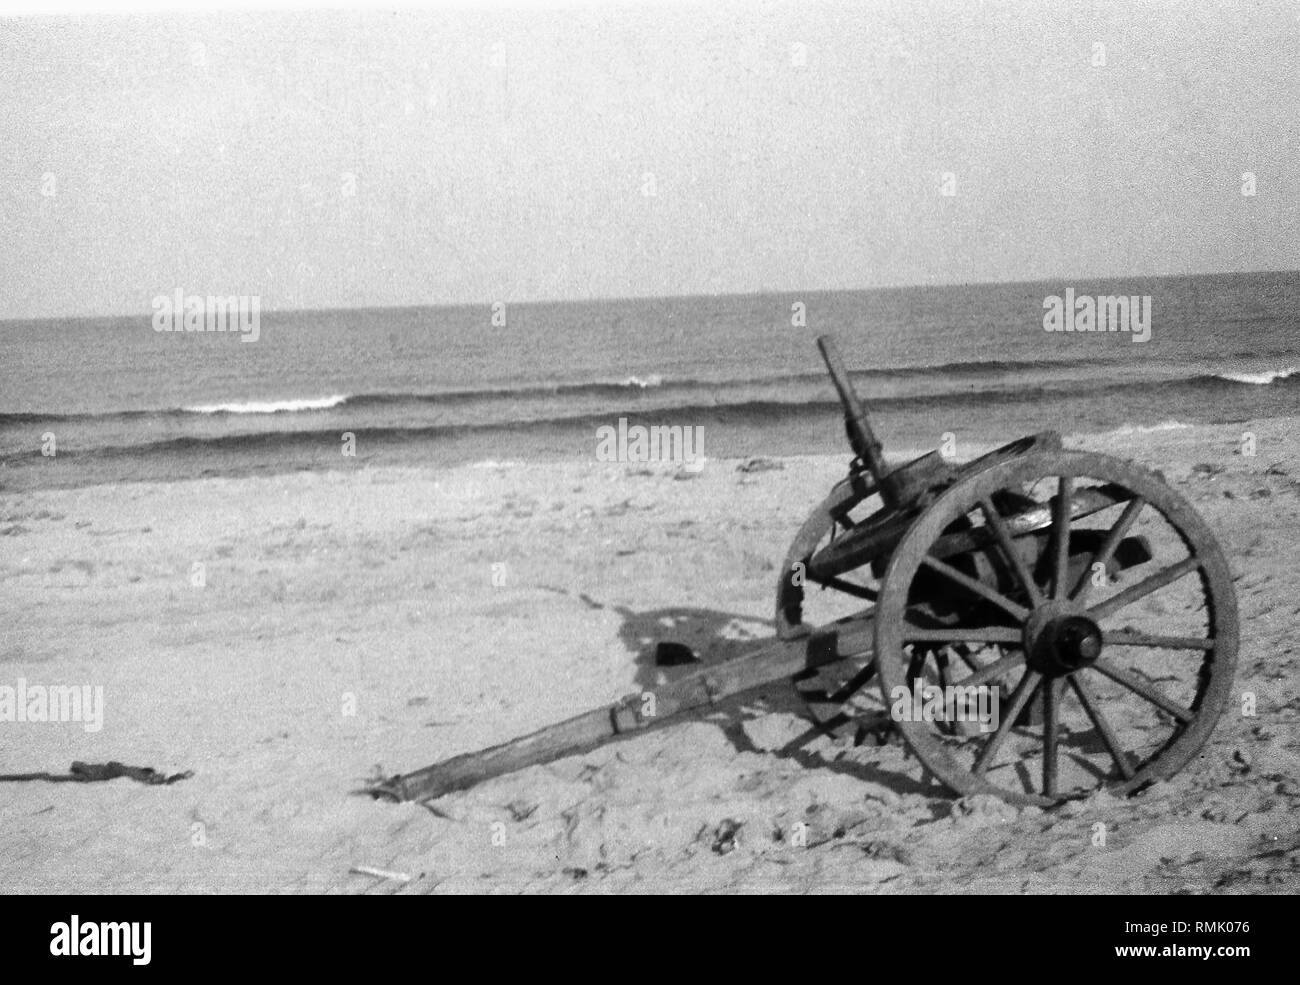 Drawbar of a wagon left behind on the Vistula Lagoon on the shore of Gdansk Bay. At the beginning of February 1945, refugees attempt to flee across the ice of the Vistula Lagoon to the Vistula Spit to reach the Baltic Sea coast of Gdansk. The picture was taken by Theodor Vonolfen, a soldier of a Luftwaffe unit, deployed there at that time. Stock Photo